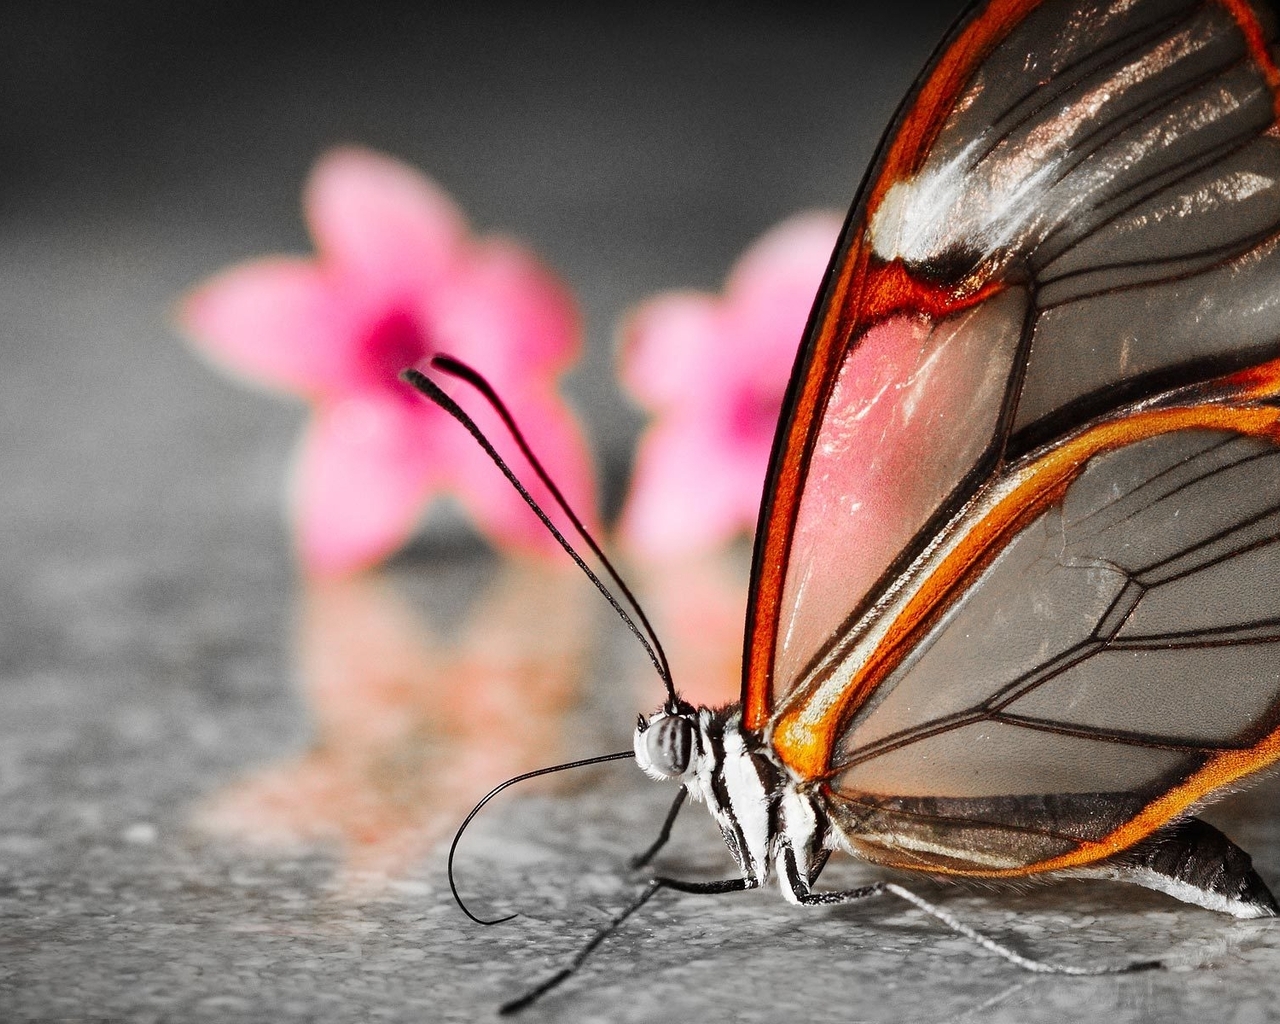 Image: butterfly, flowers, nature, beauty